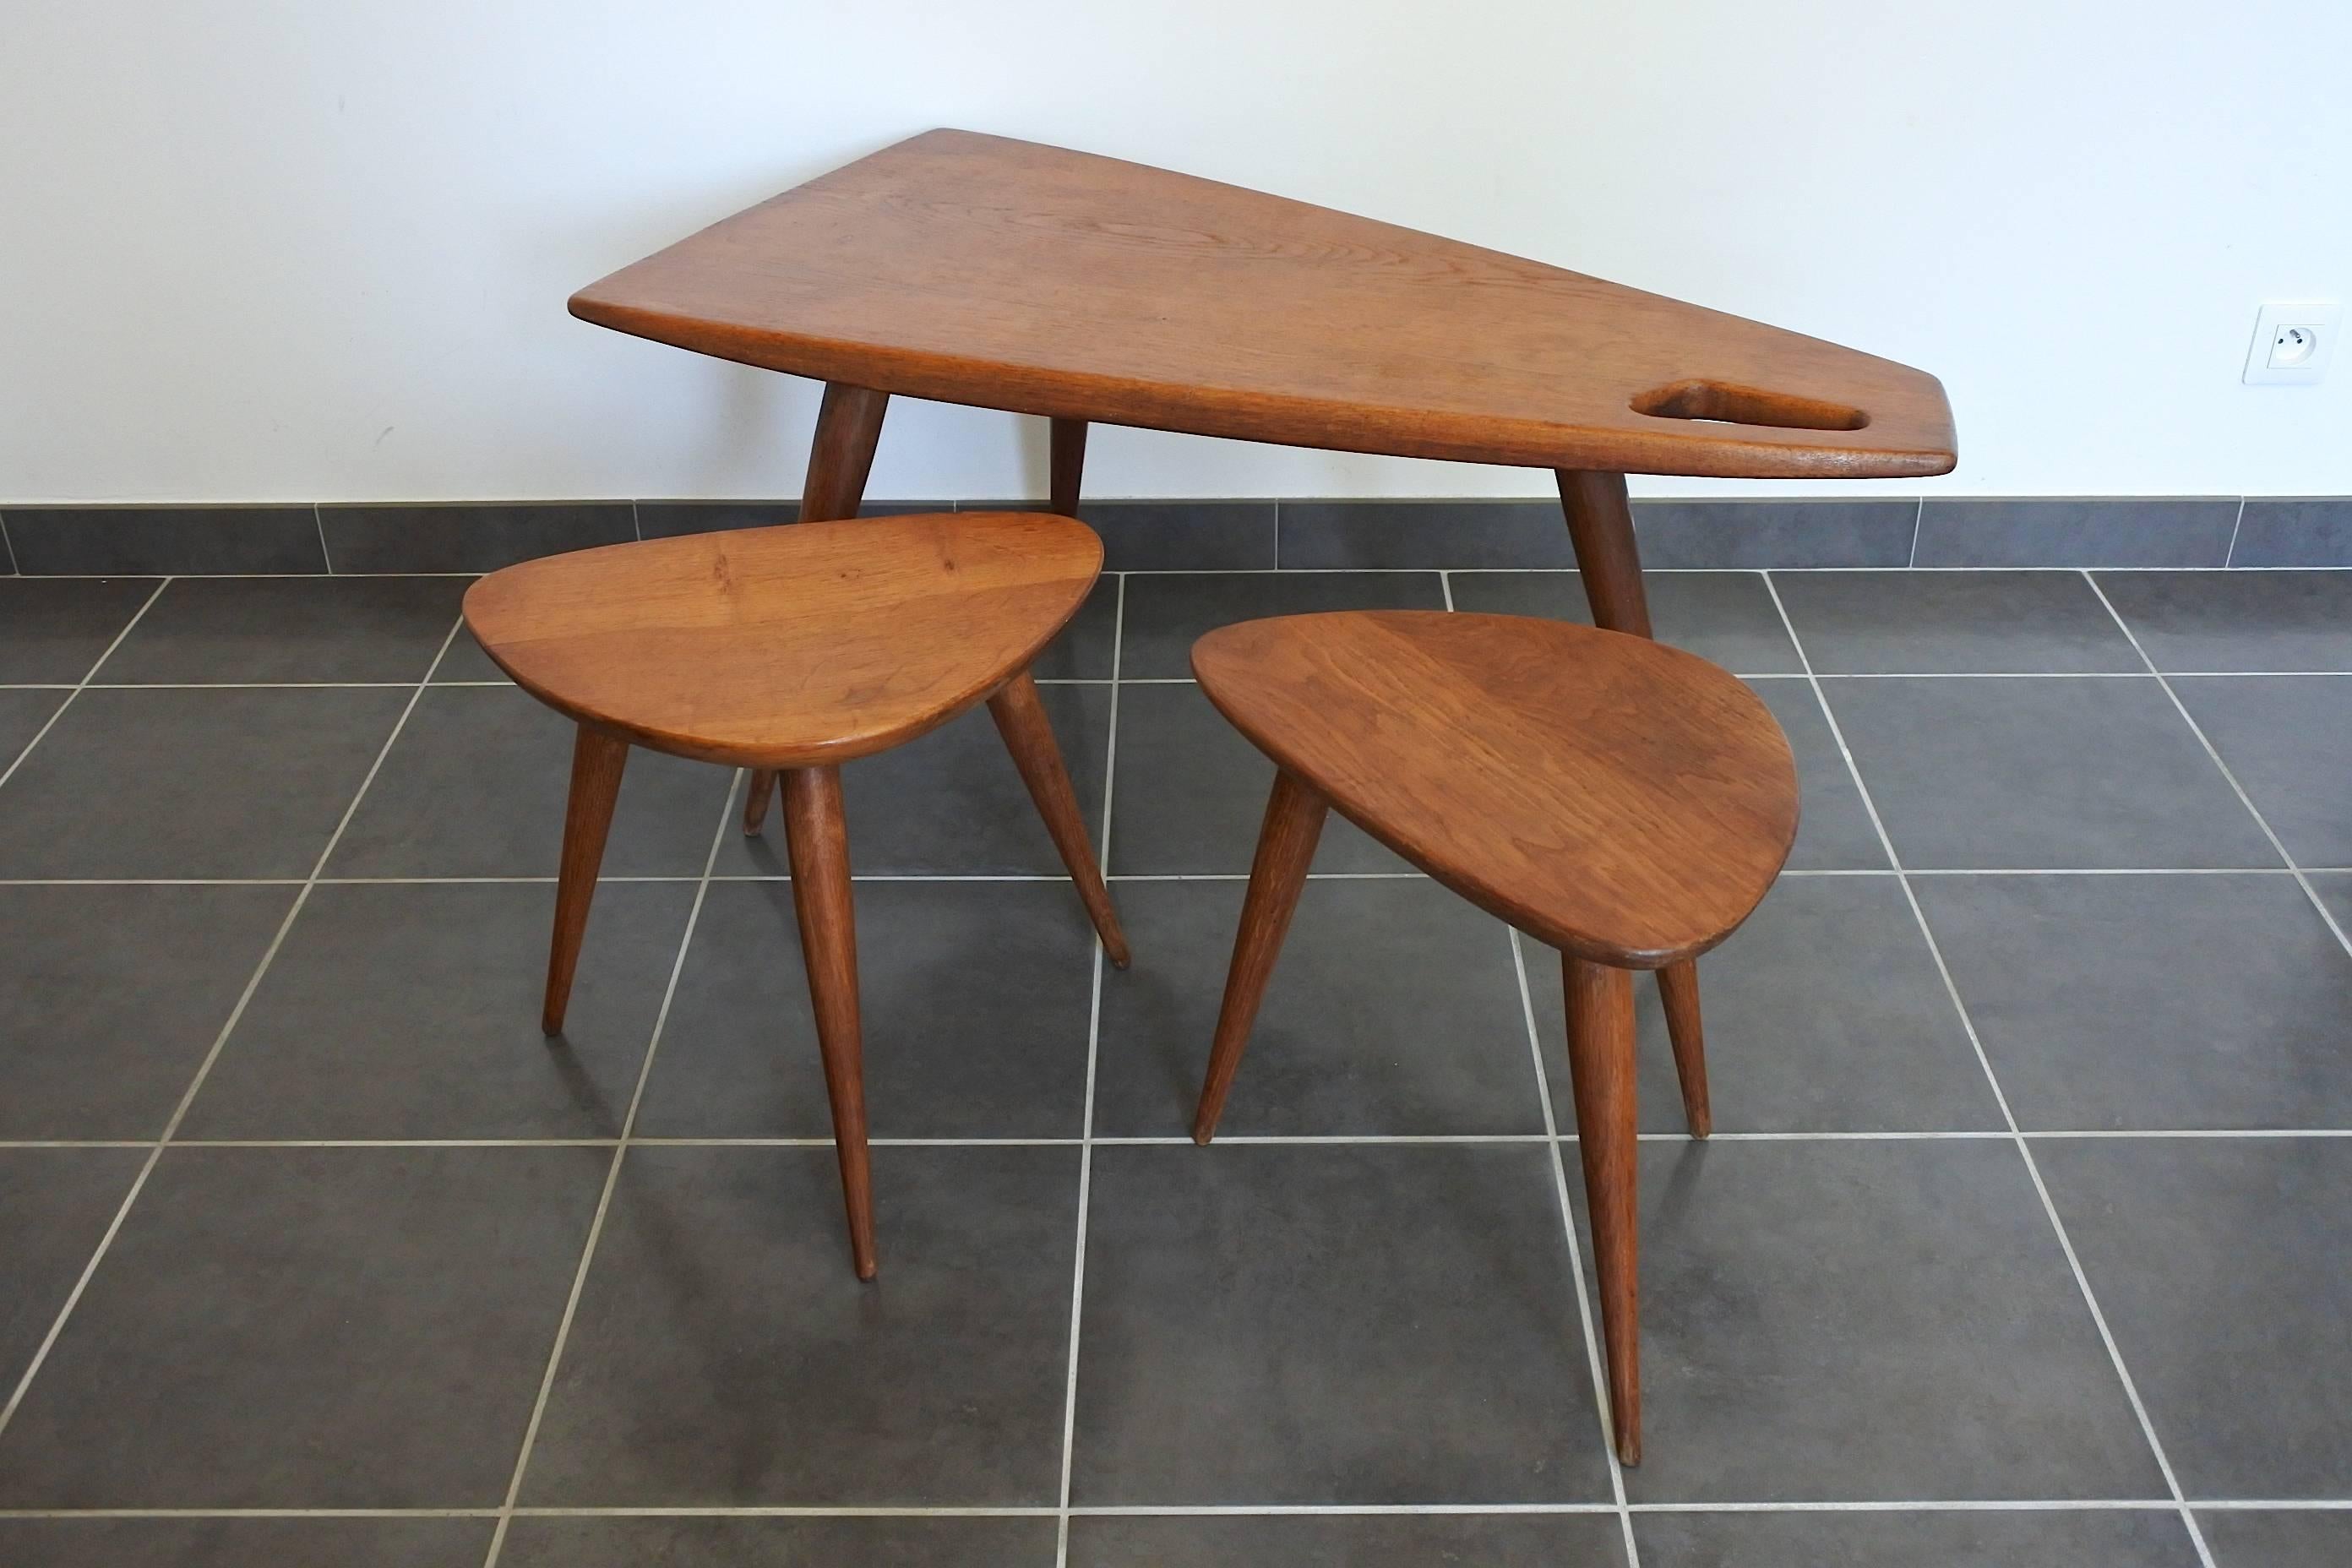 Rare set of three documented free-form tables by French designer Pierre Cruege and edited by Formes.
One tripod coffee table and two tripod side tables in solid oak wood.
France, circa 1950

Outstanding quality for this set and great